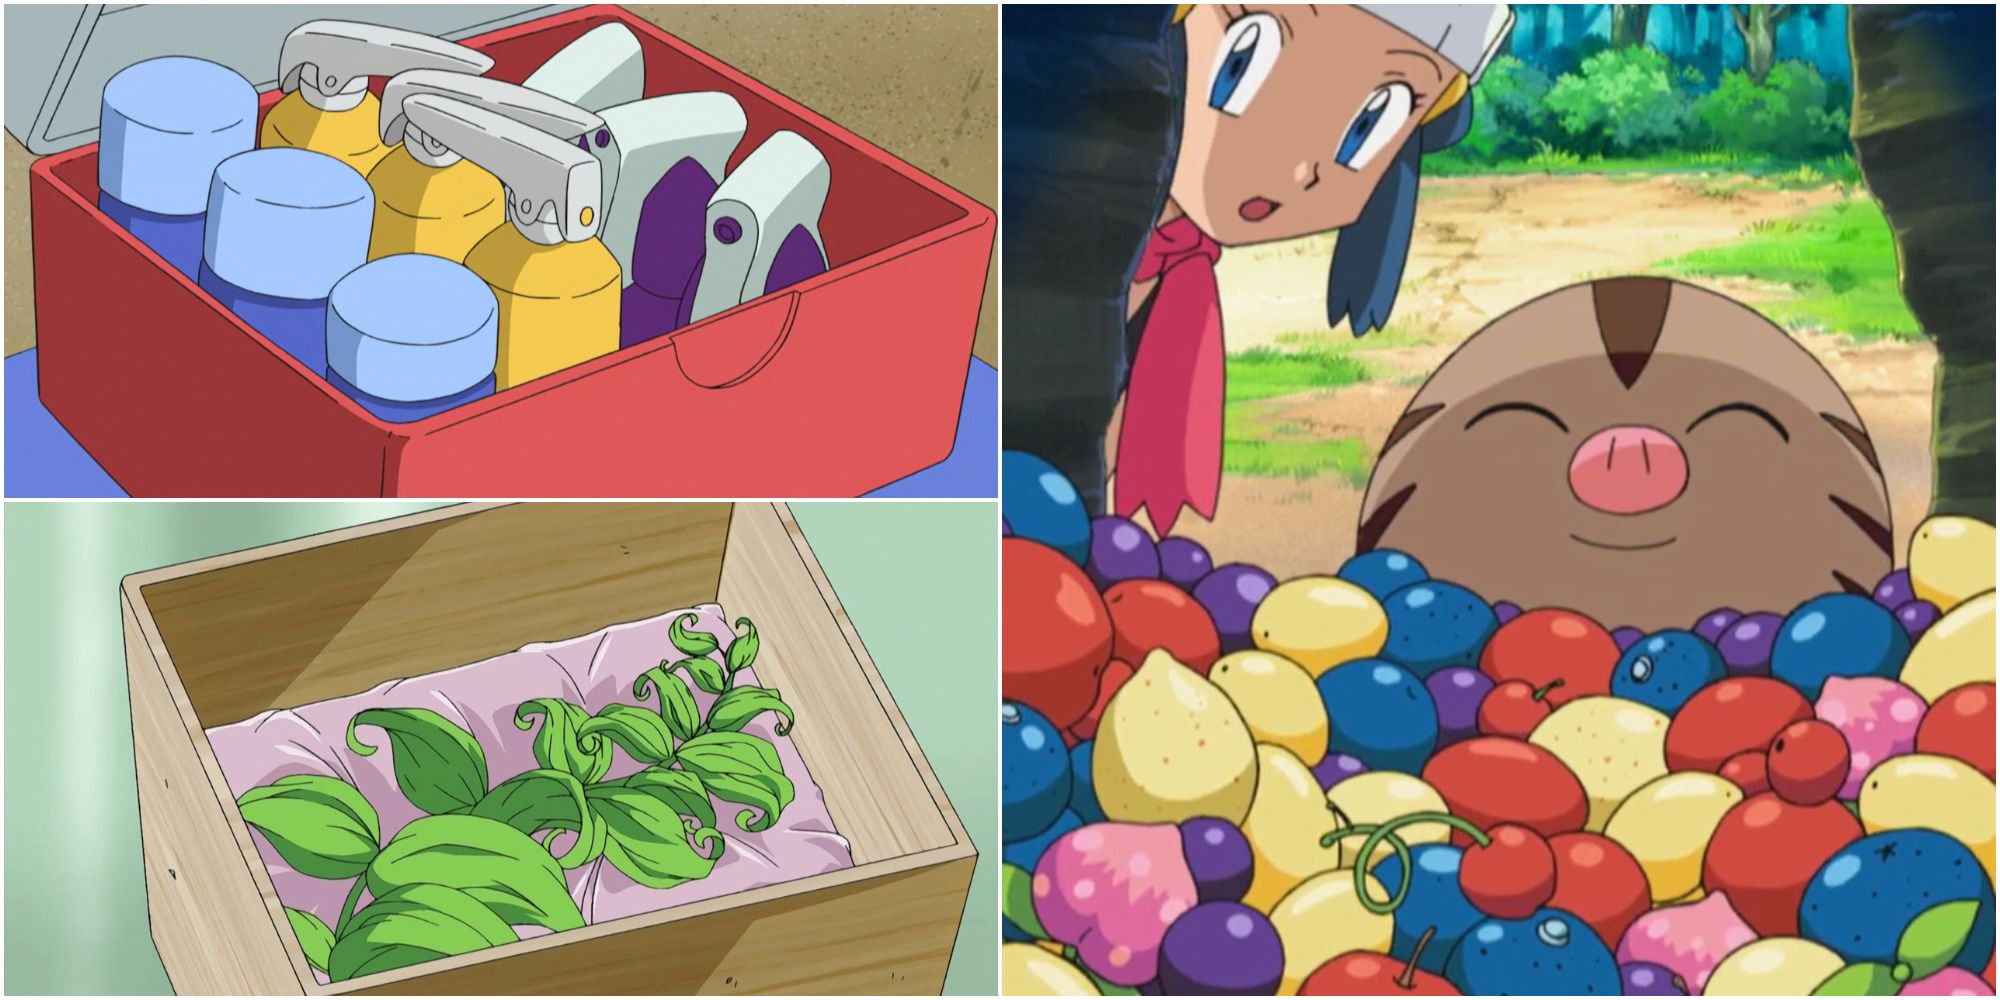 BDSP Box of Potions, a Revival Herb, and a Swinub admiring his berry collection